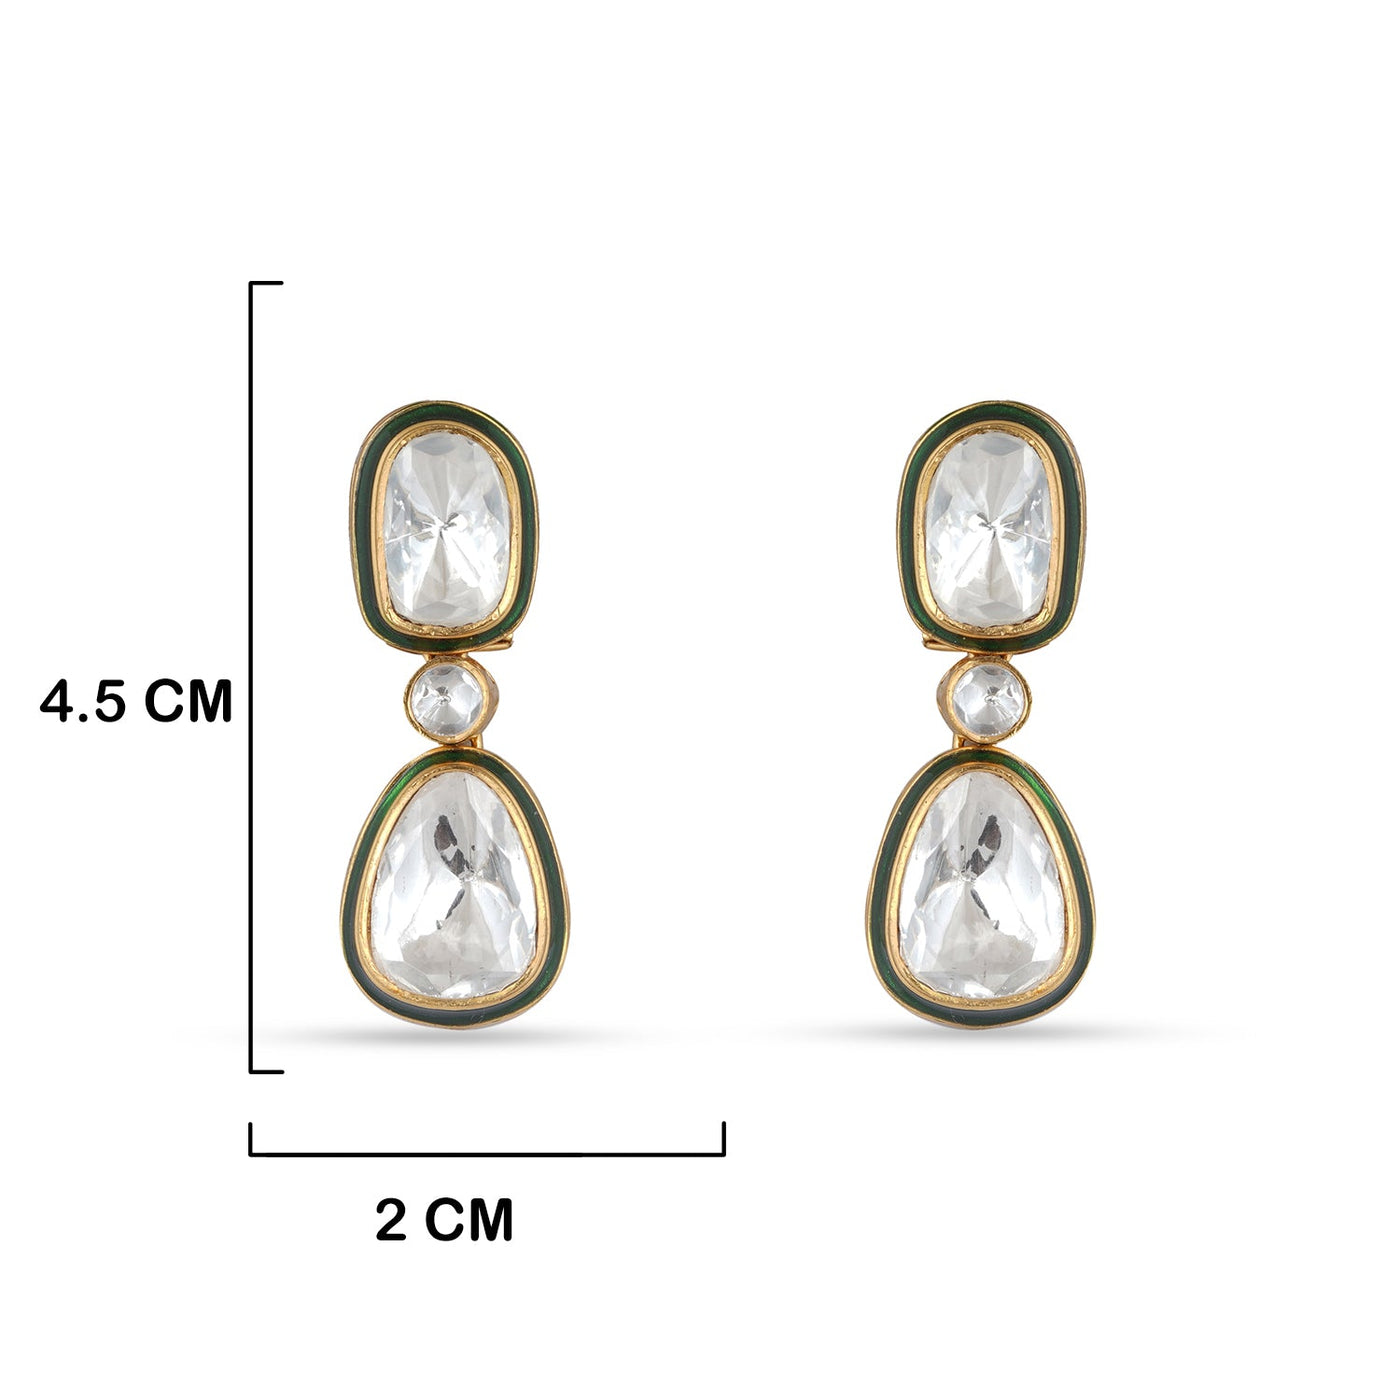 Double Layer Polki Earrings with measurements in cm. 4.5cm by 2cm.